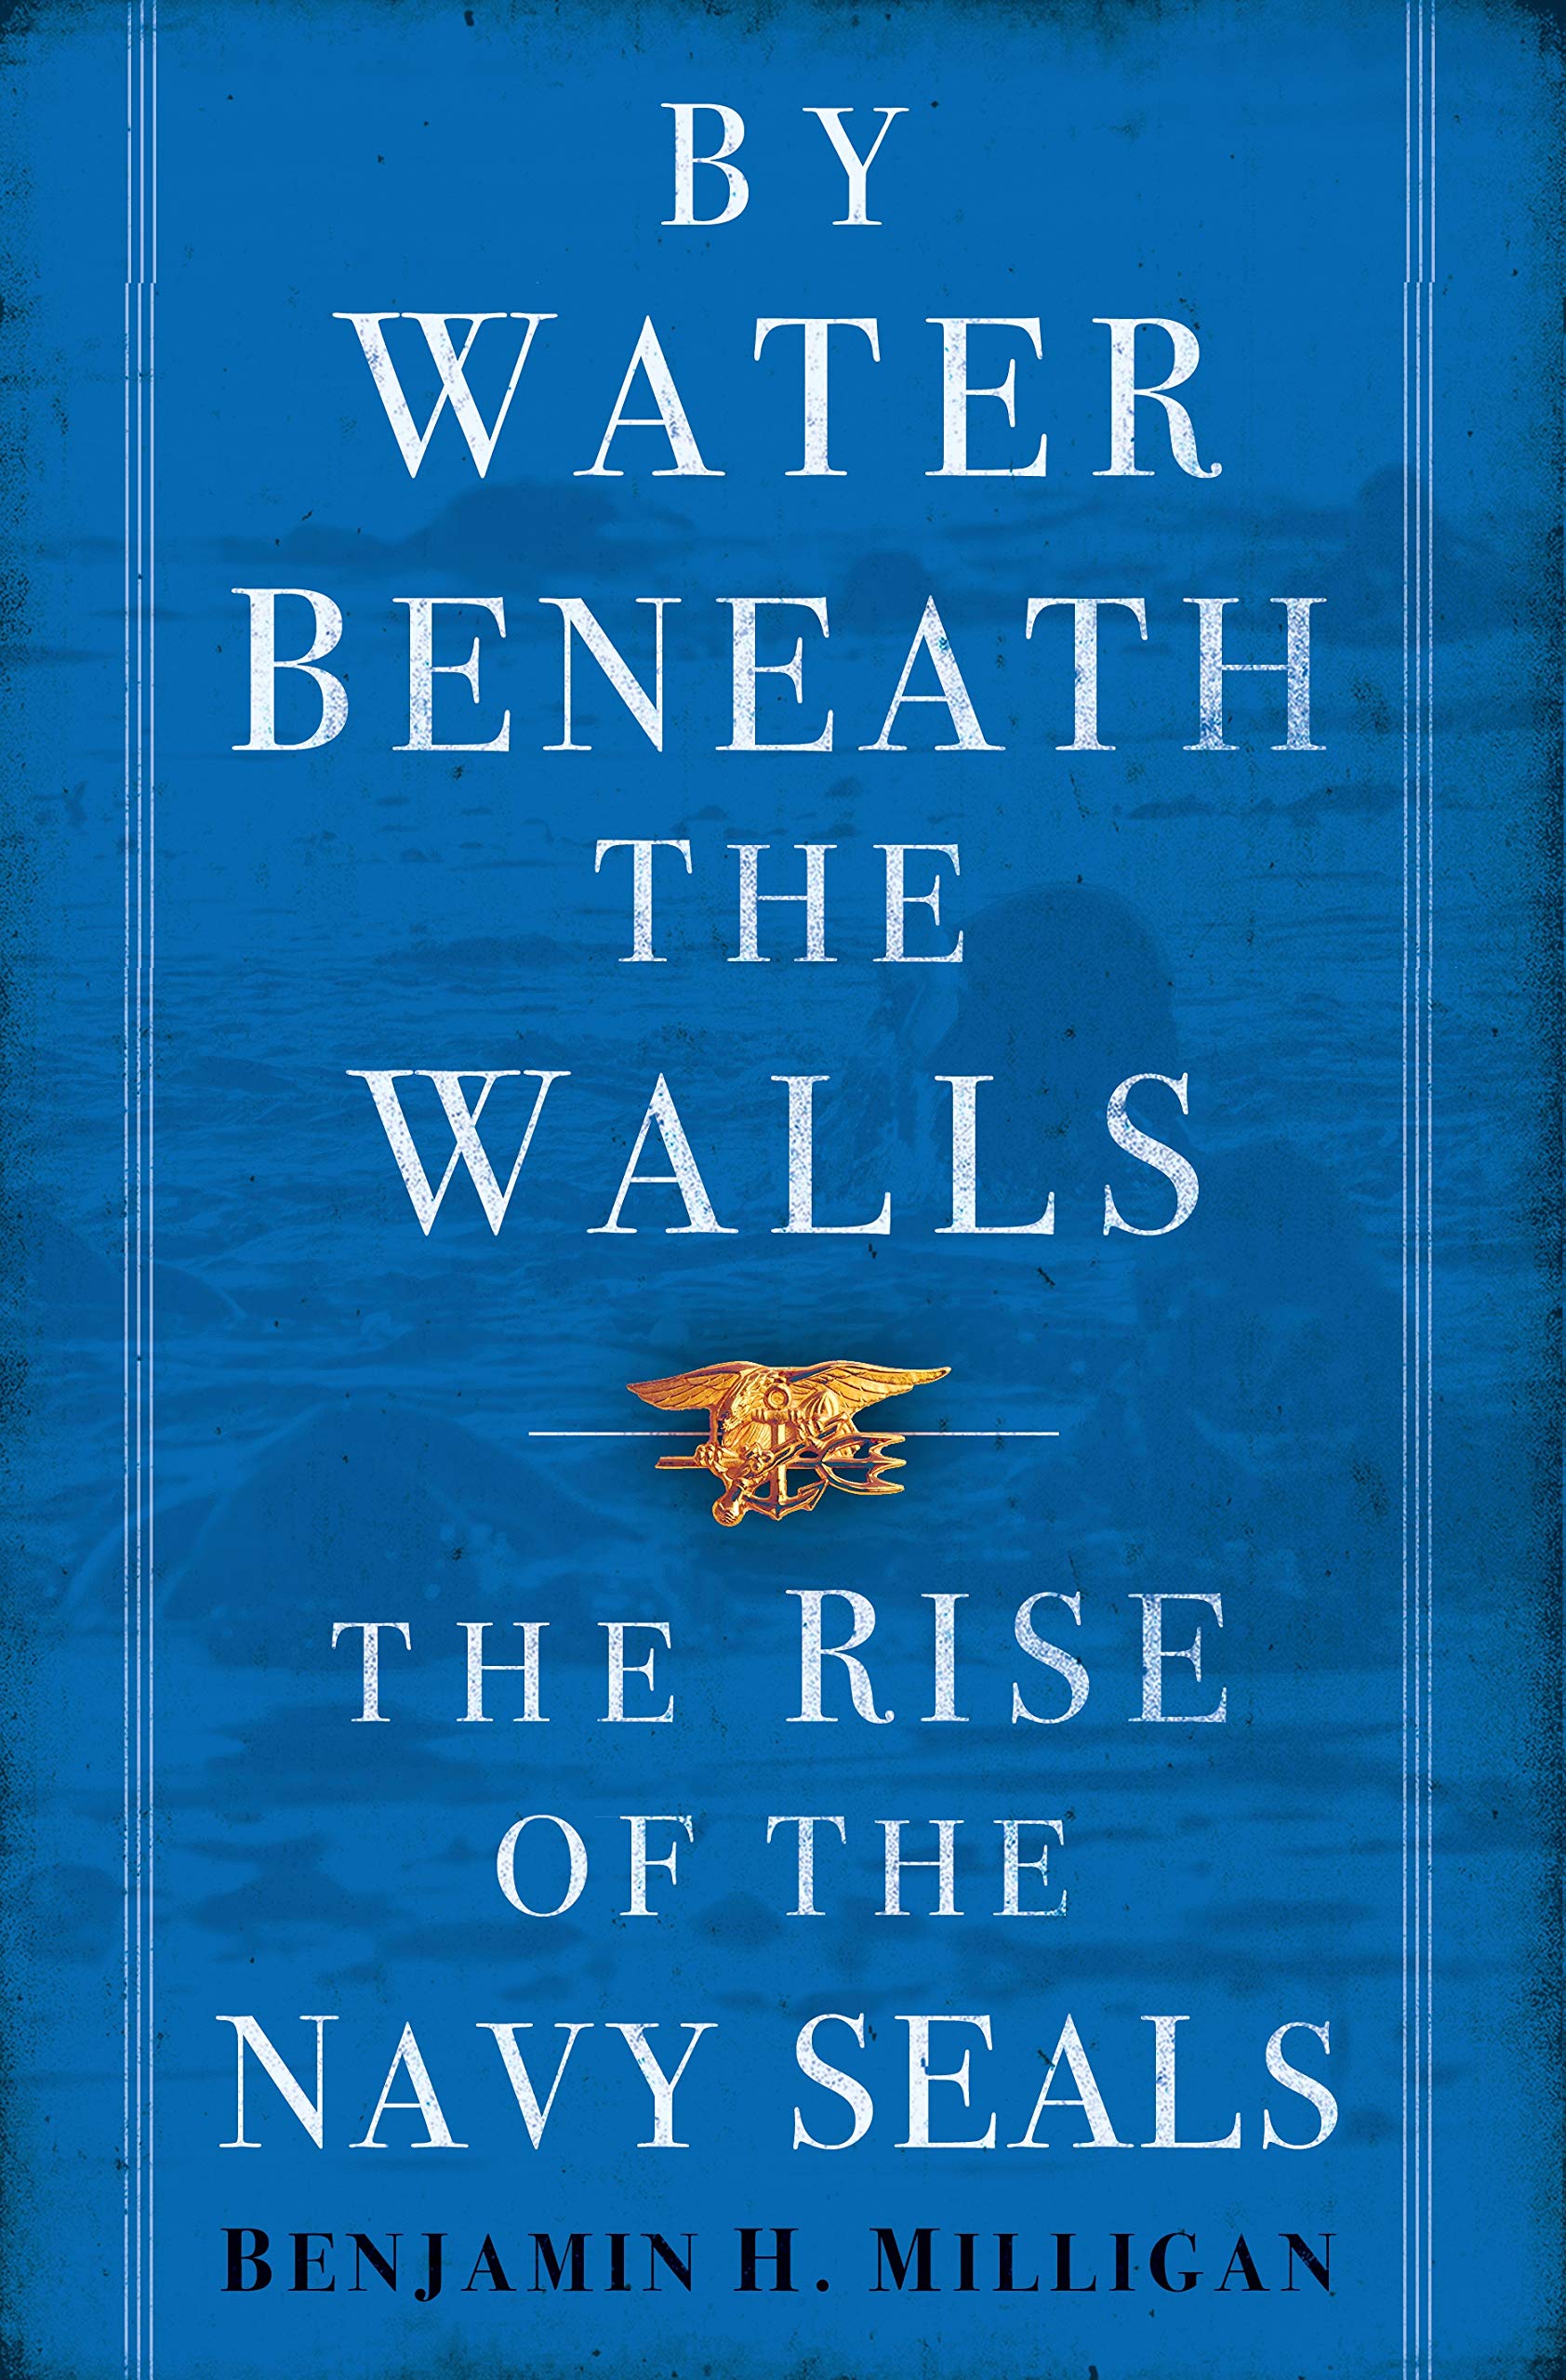 By Water Beneath the Walls: The Rise of the Navy Seals